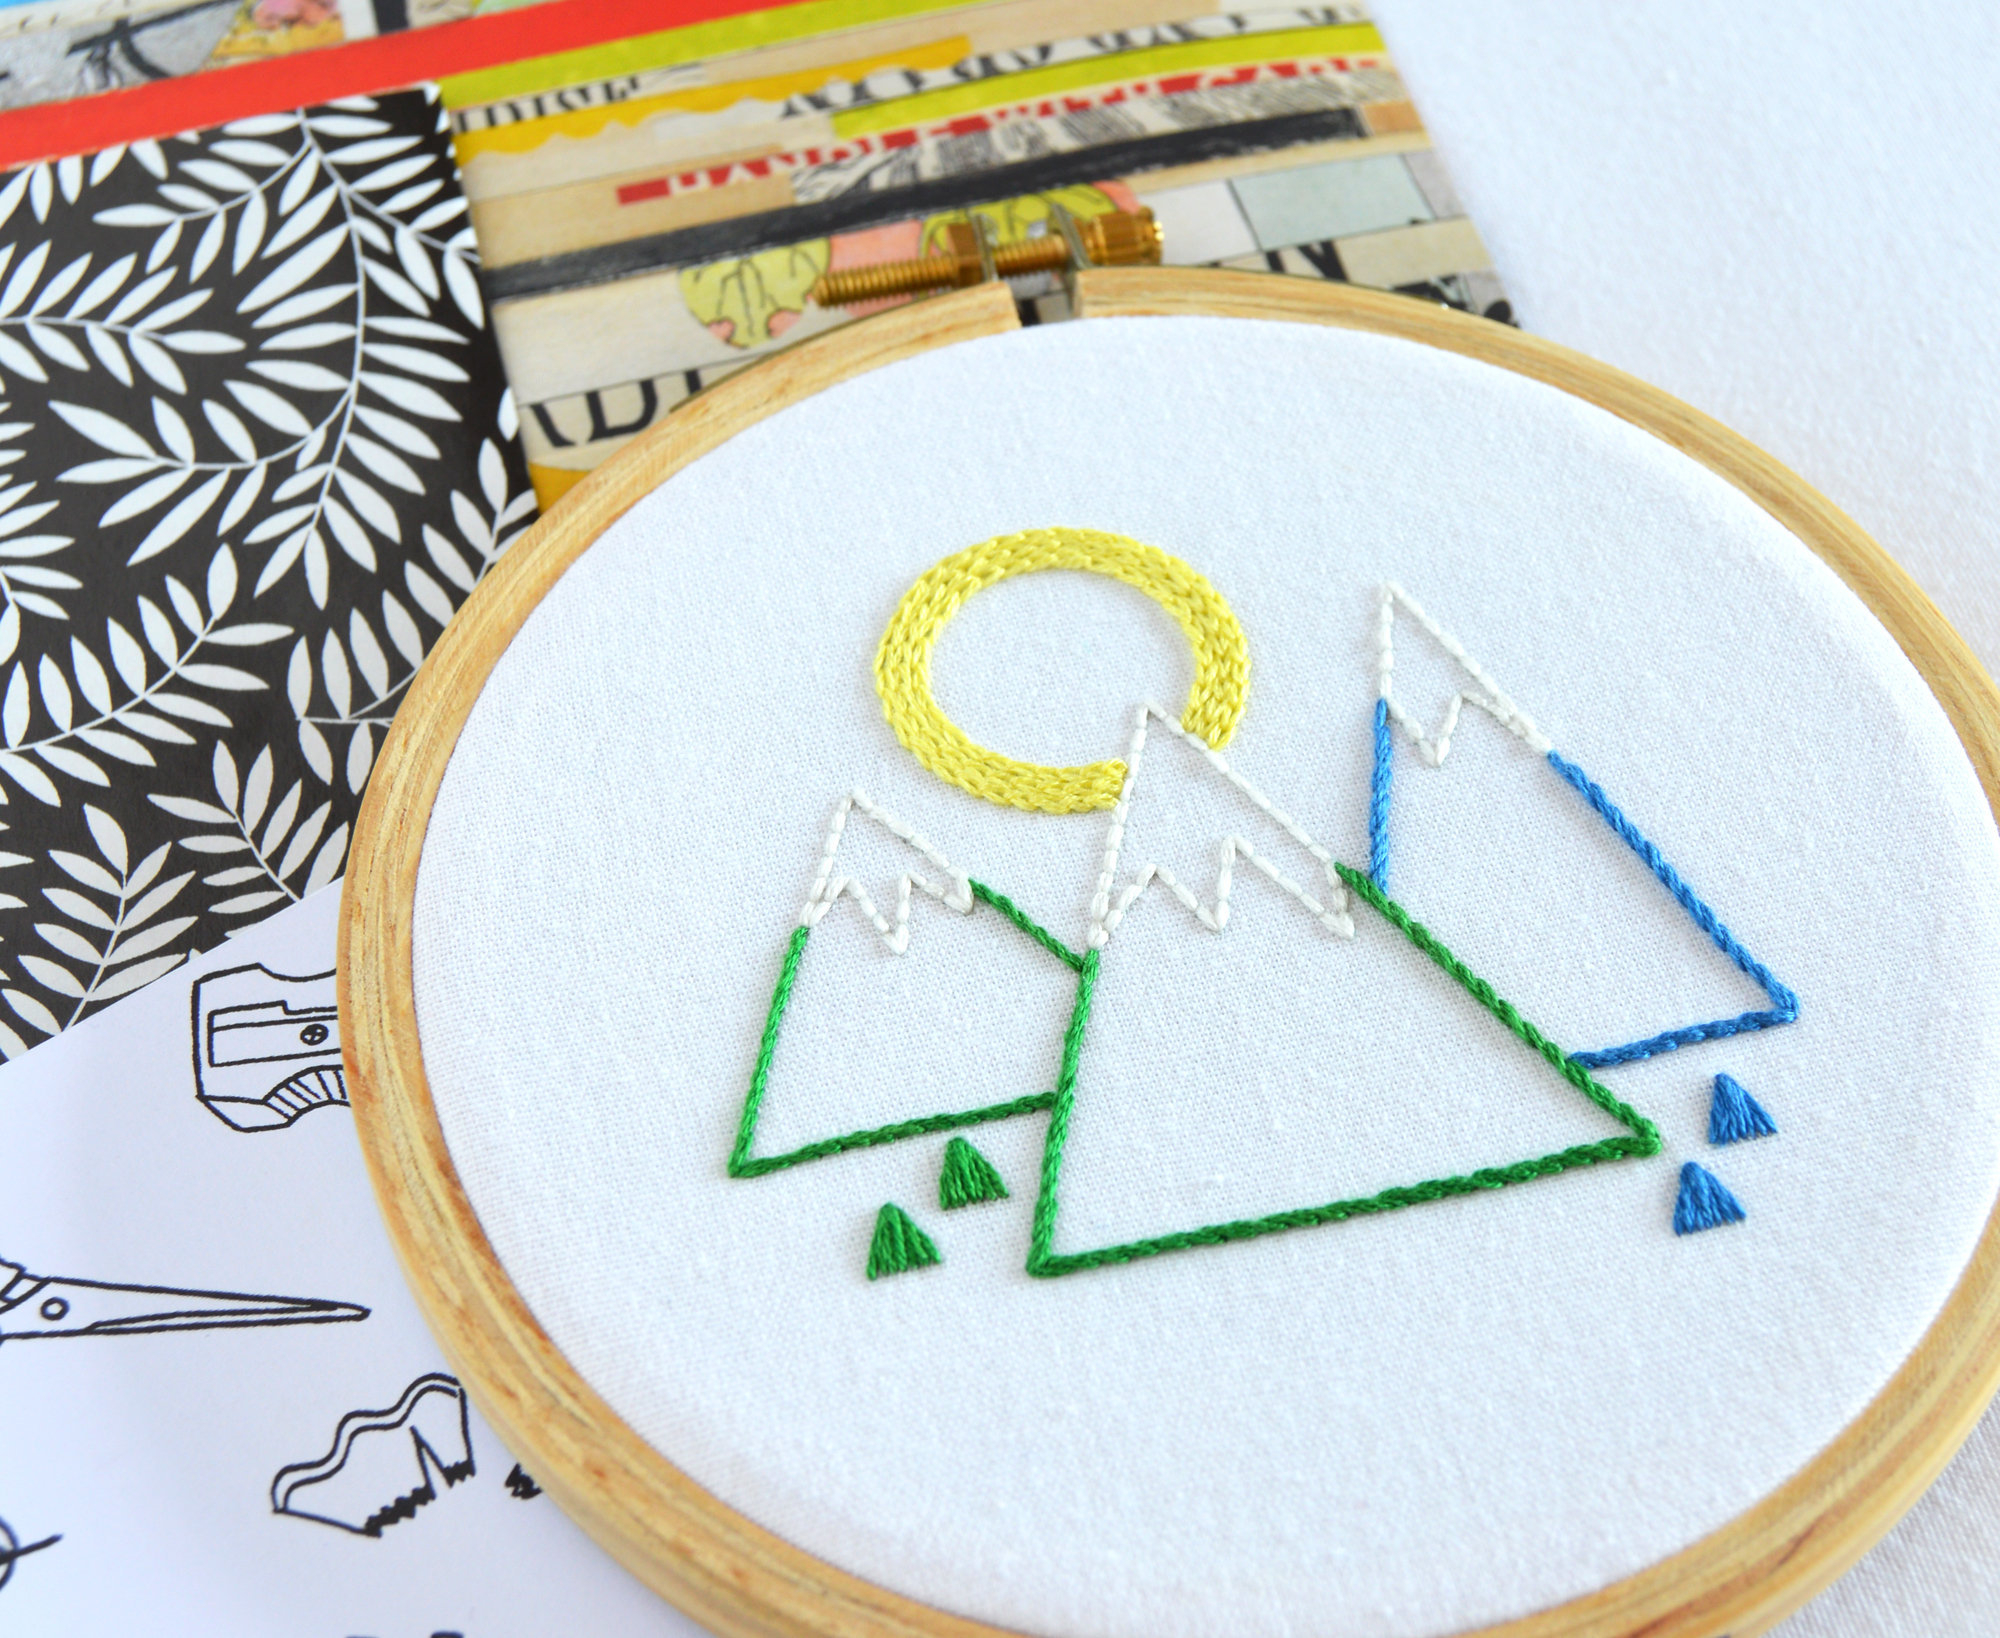 Hand Embroidery Sampler Patterns Mountain Sampler Hand Embroidery Pattern An Embroidery Sampler Pdf Pattern